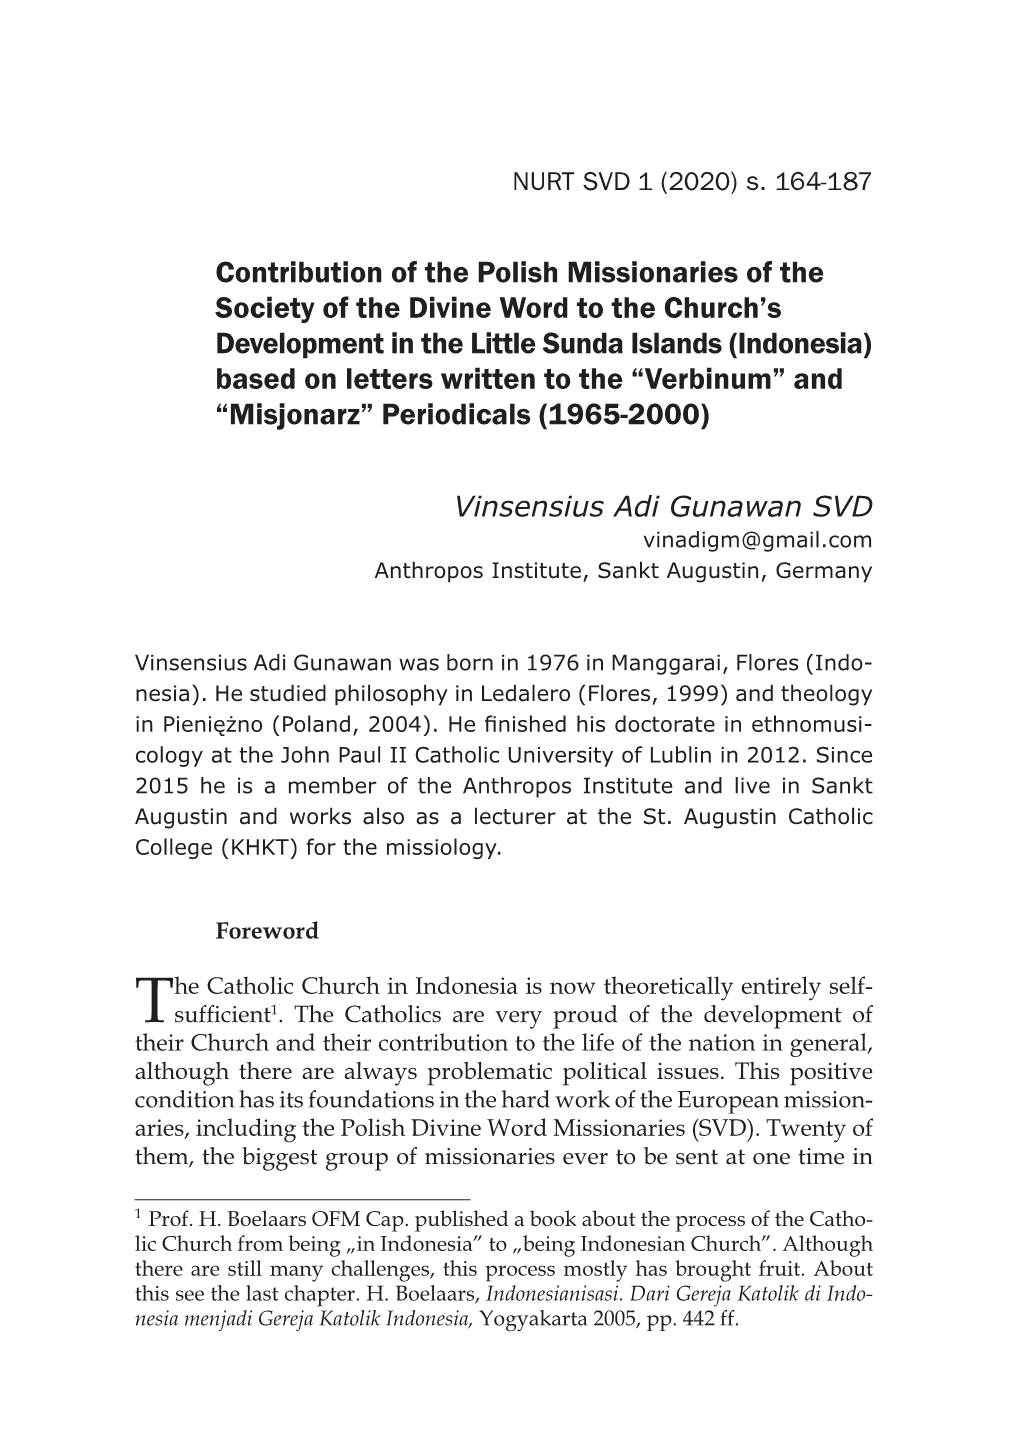 Contribution of the Polish Missionaries of the Society of the Divine Word to the Church's Development in the Little Sunda